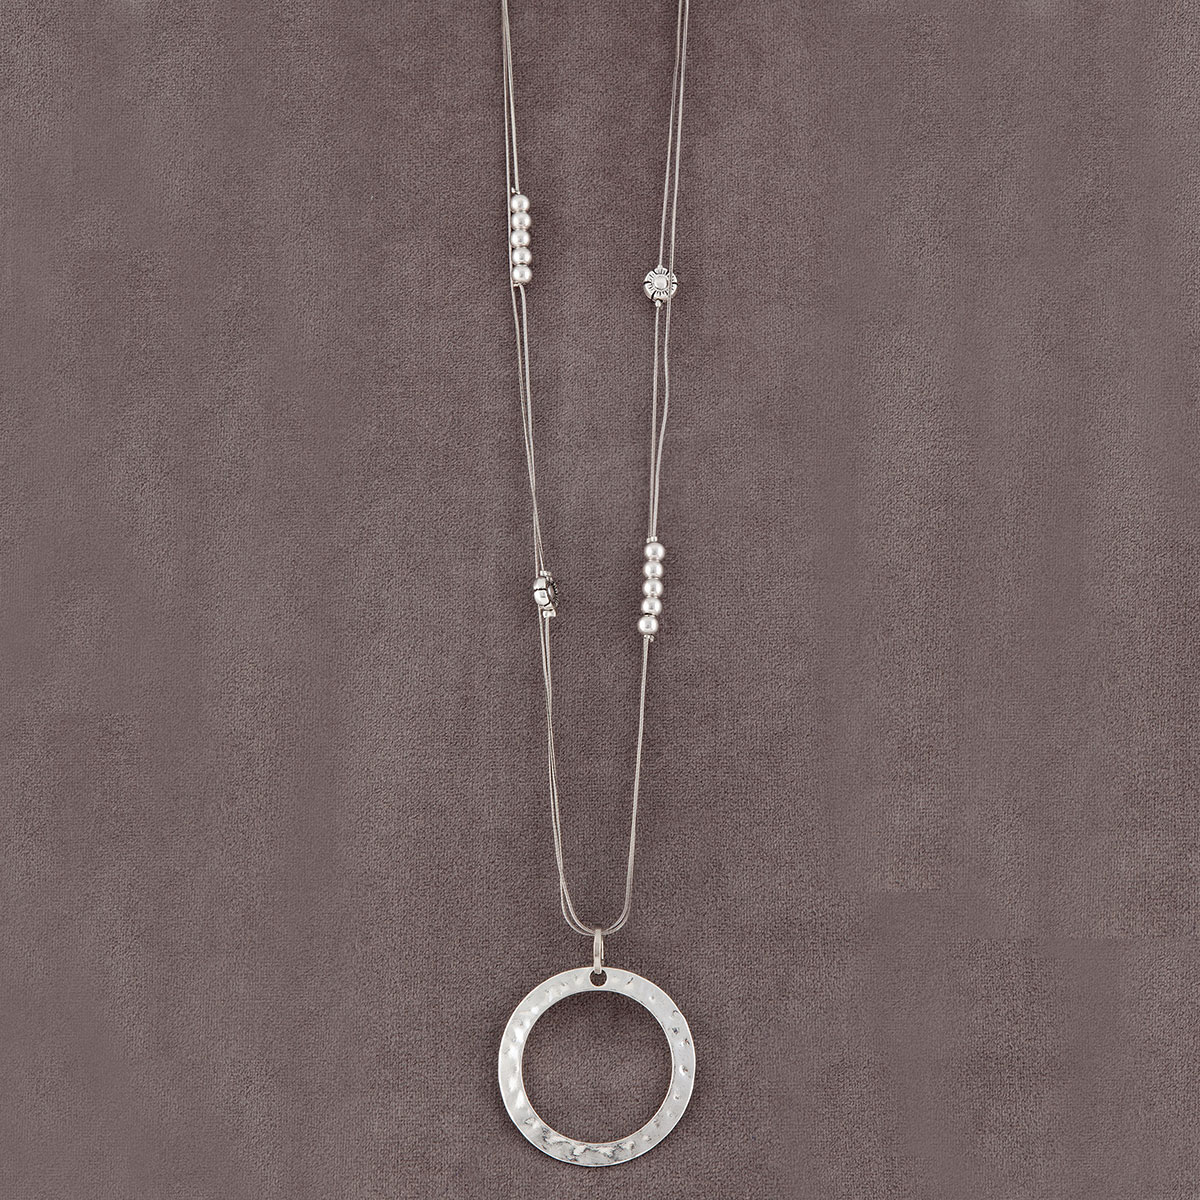 Hammered Silver Circle with Beads on Chain Necklace